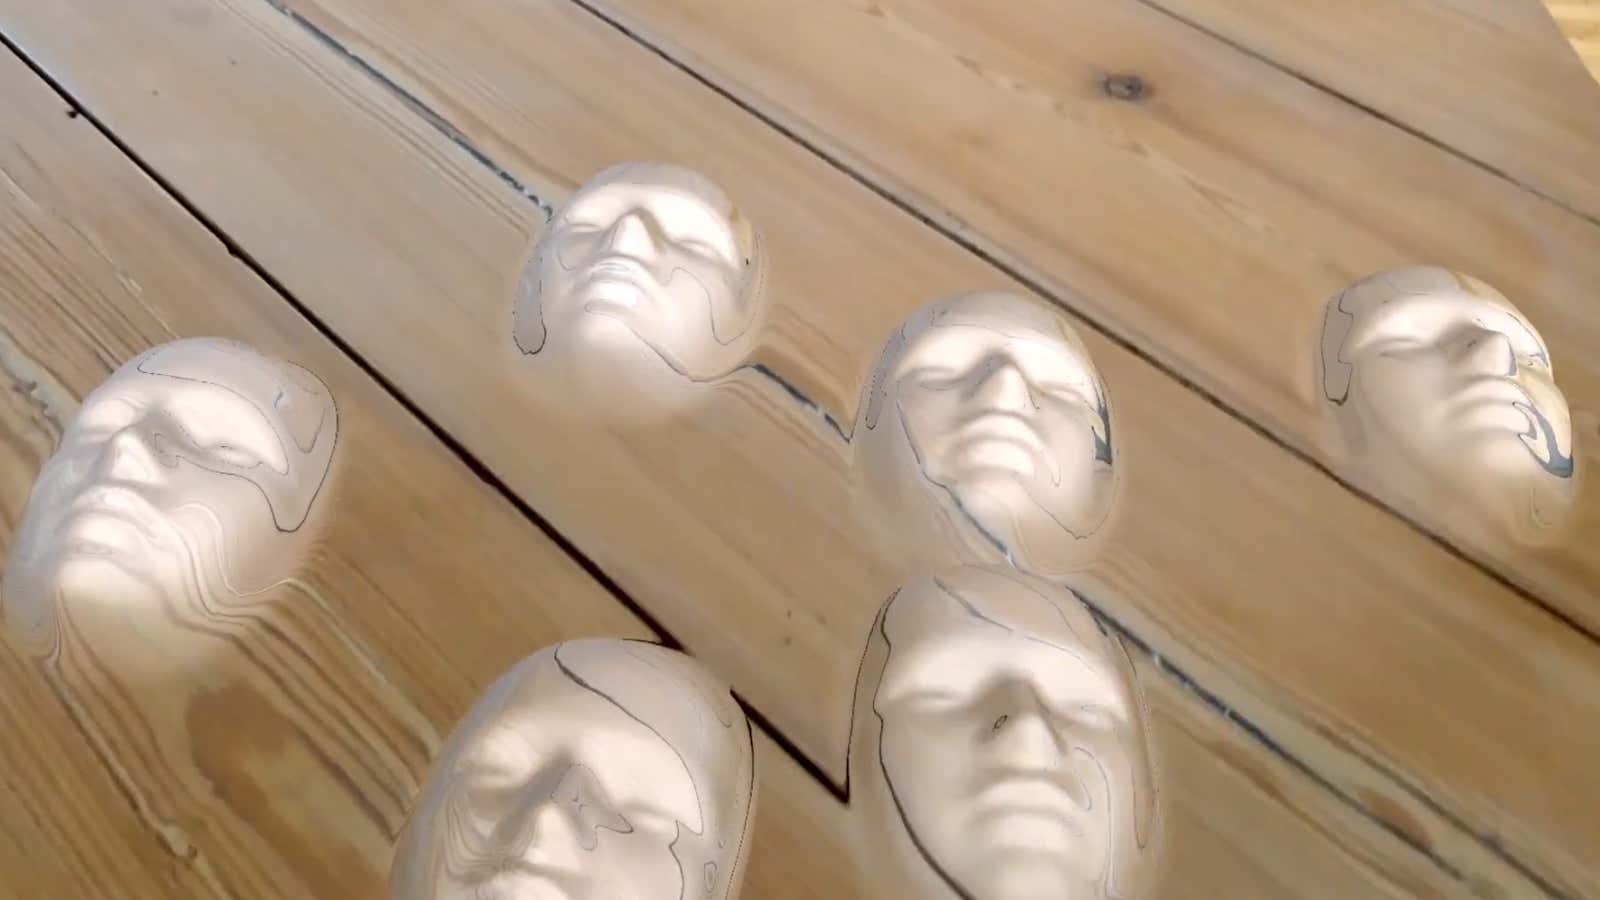 Google’s augmented reality lets your table grow faces. Practical and fun!